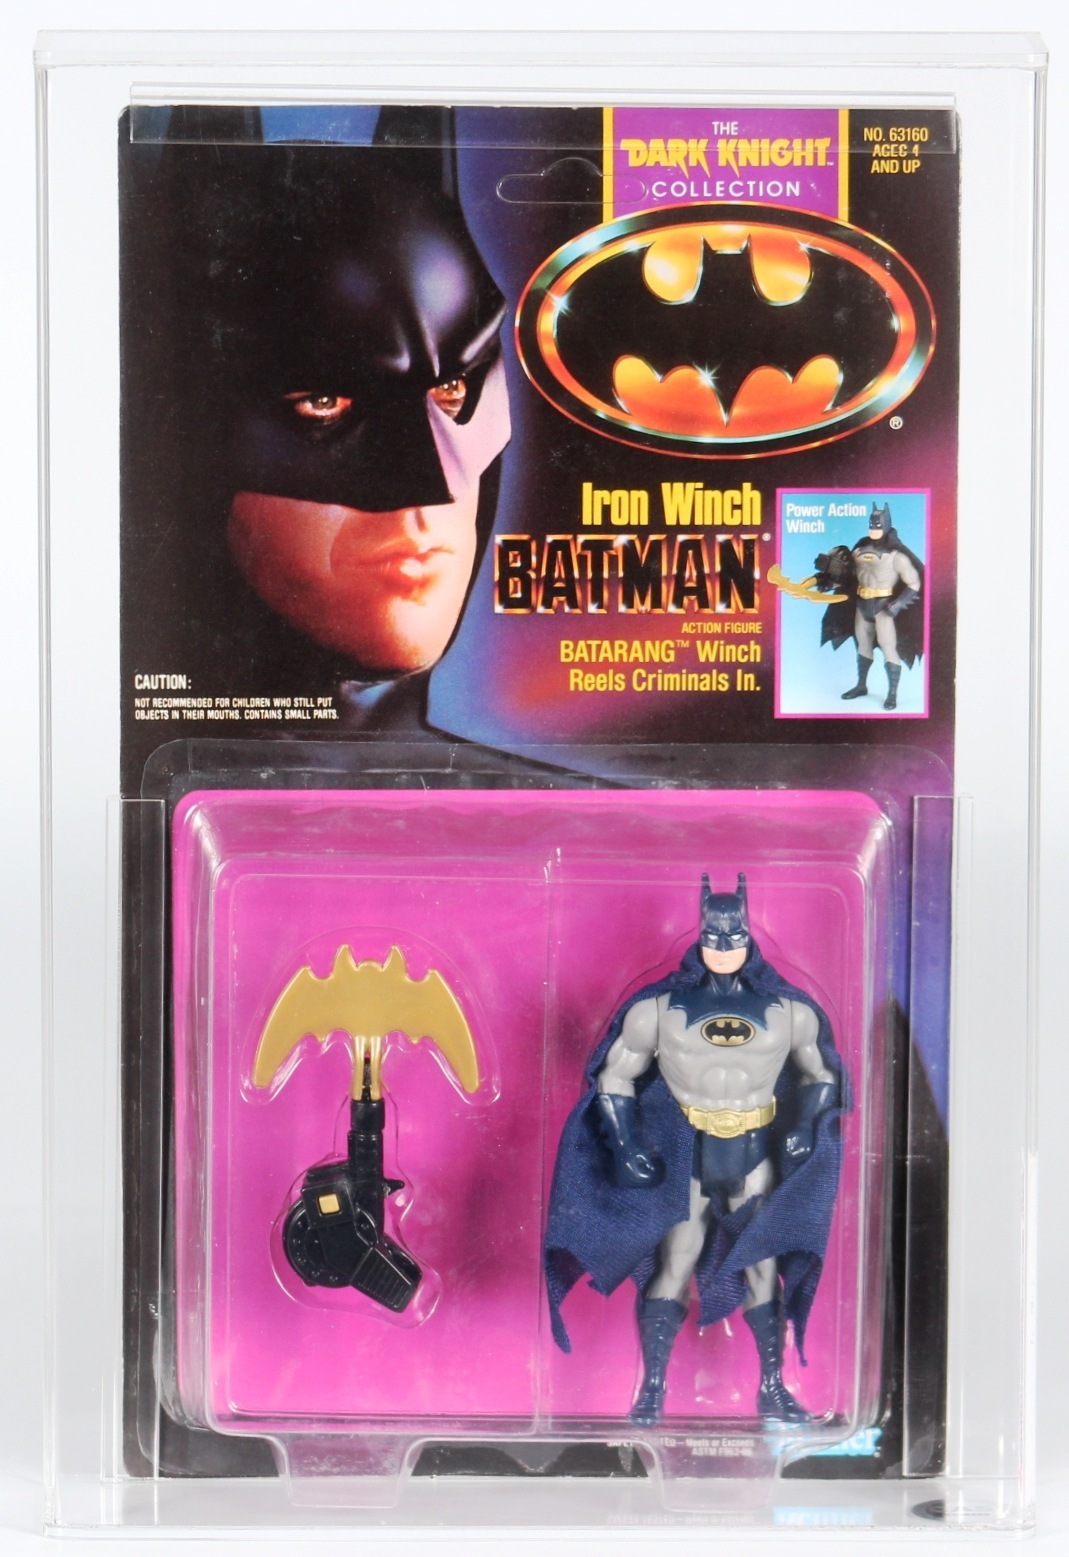 1990 Kenner Batman Dark Knight Collection Carded Action Figure - Iron Winch